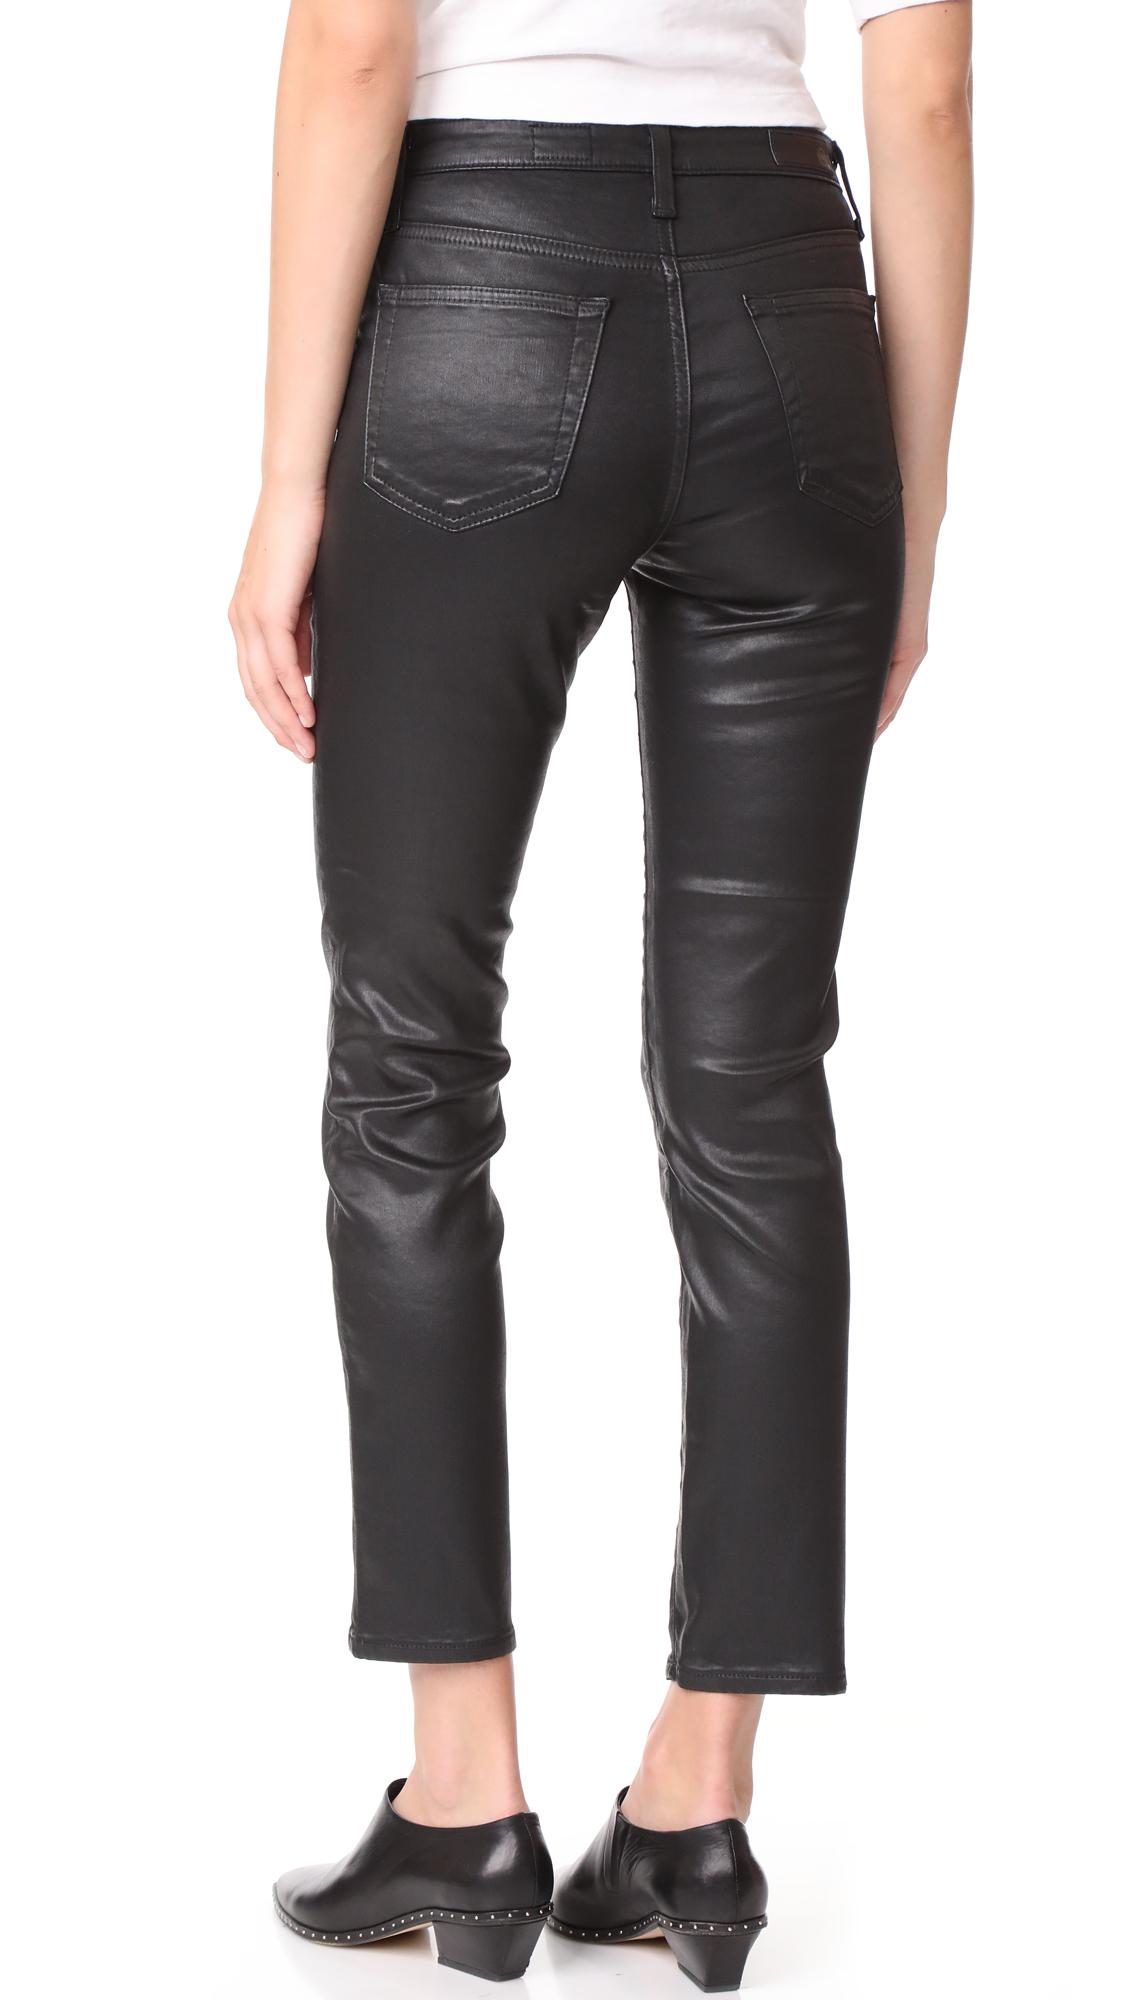 Lyst - Ag Jeans The Isabelle Jeans in Black